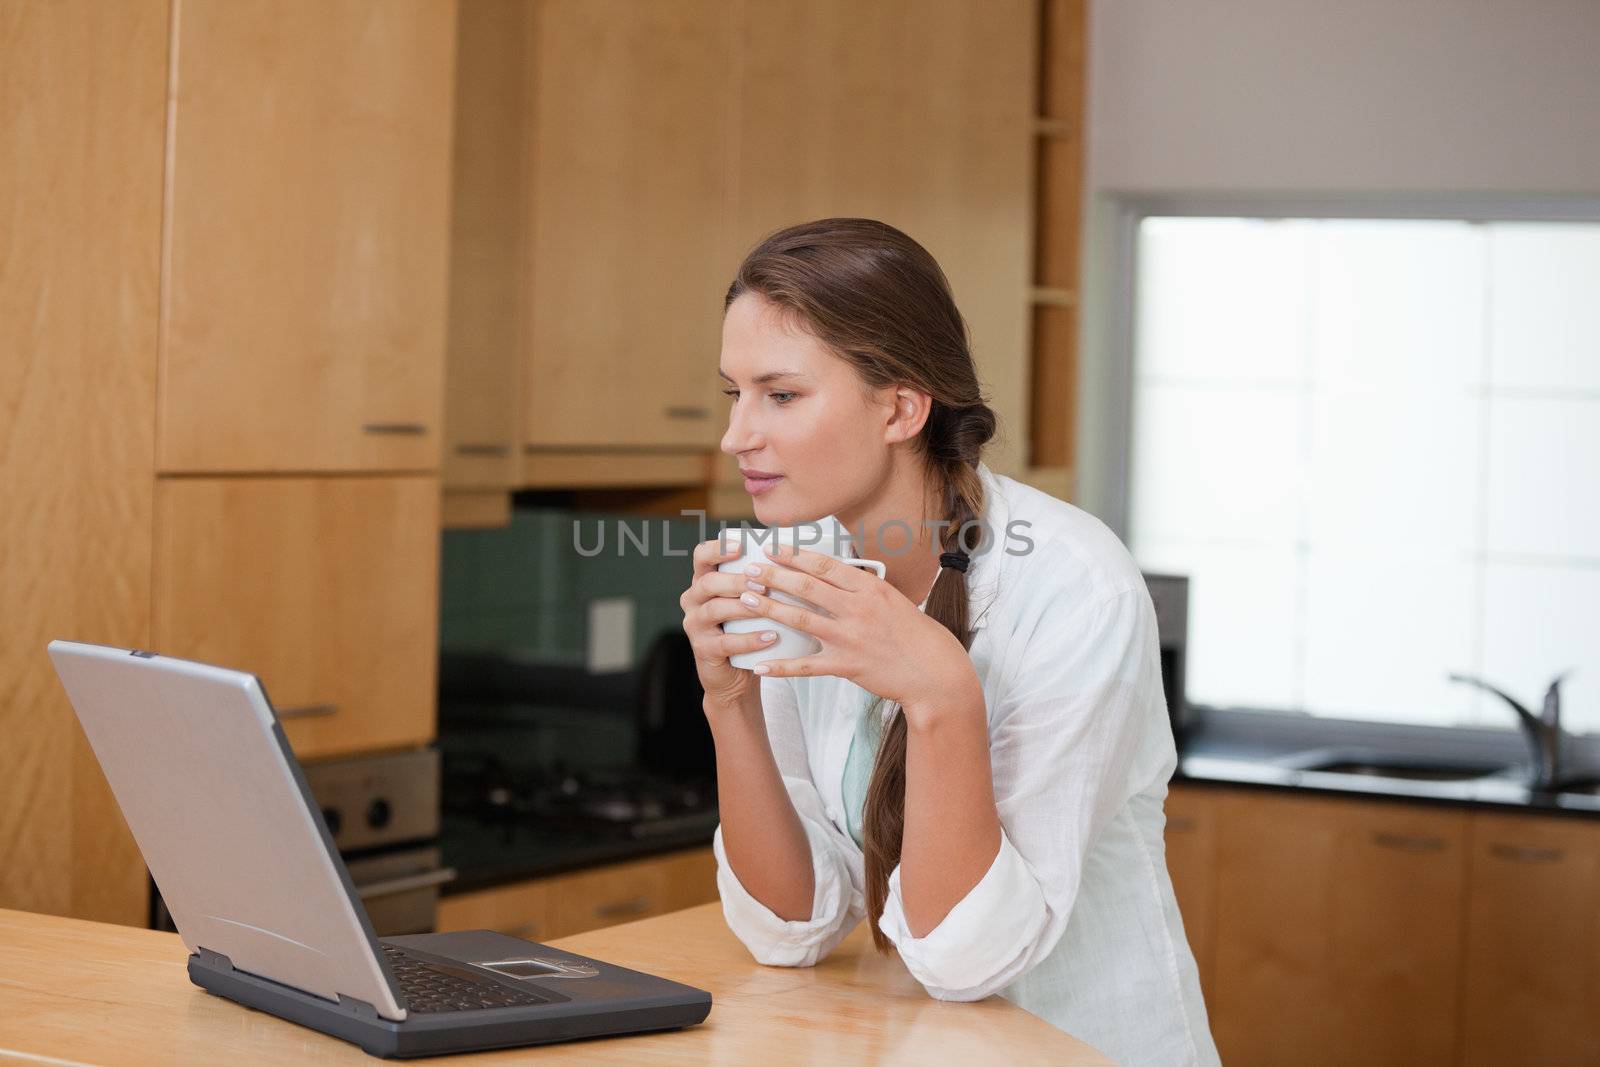 Woman holding a cup while looking at a computer in a kitchen